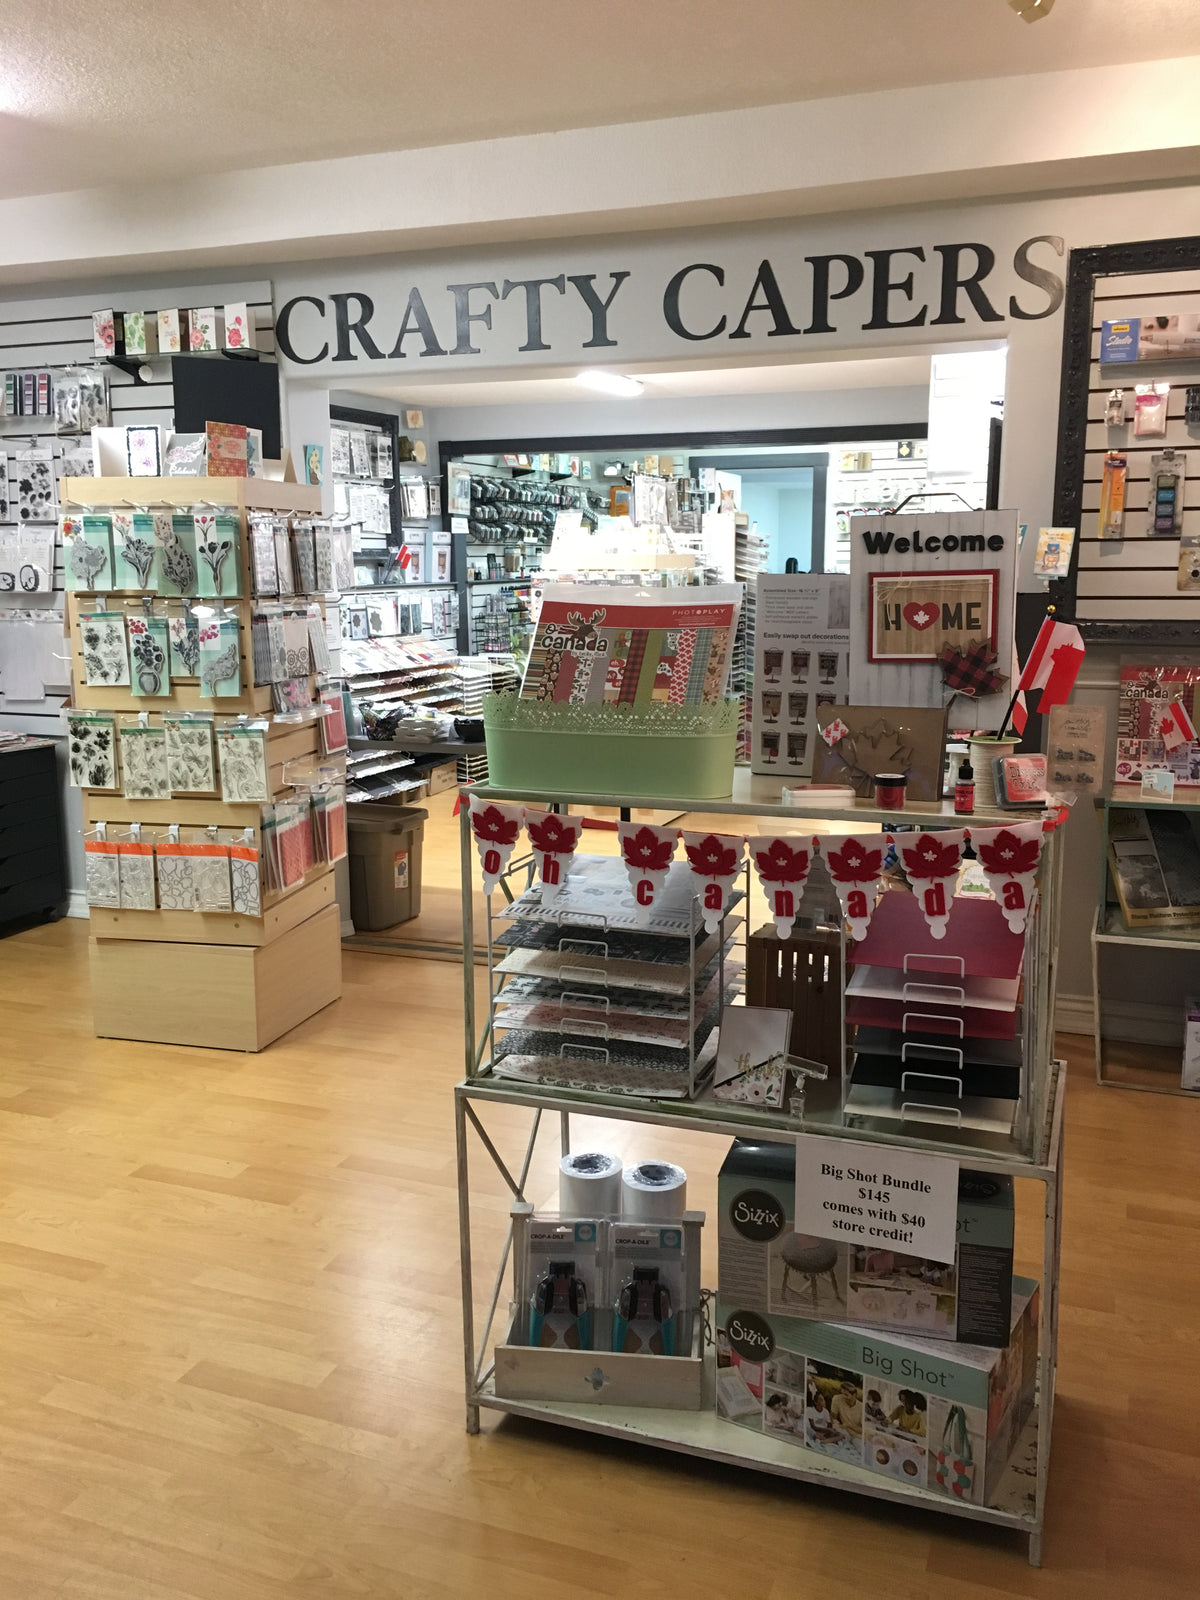 Avery Elle — Crafty Capers Rubber Stamps & Scrapbooking